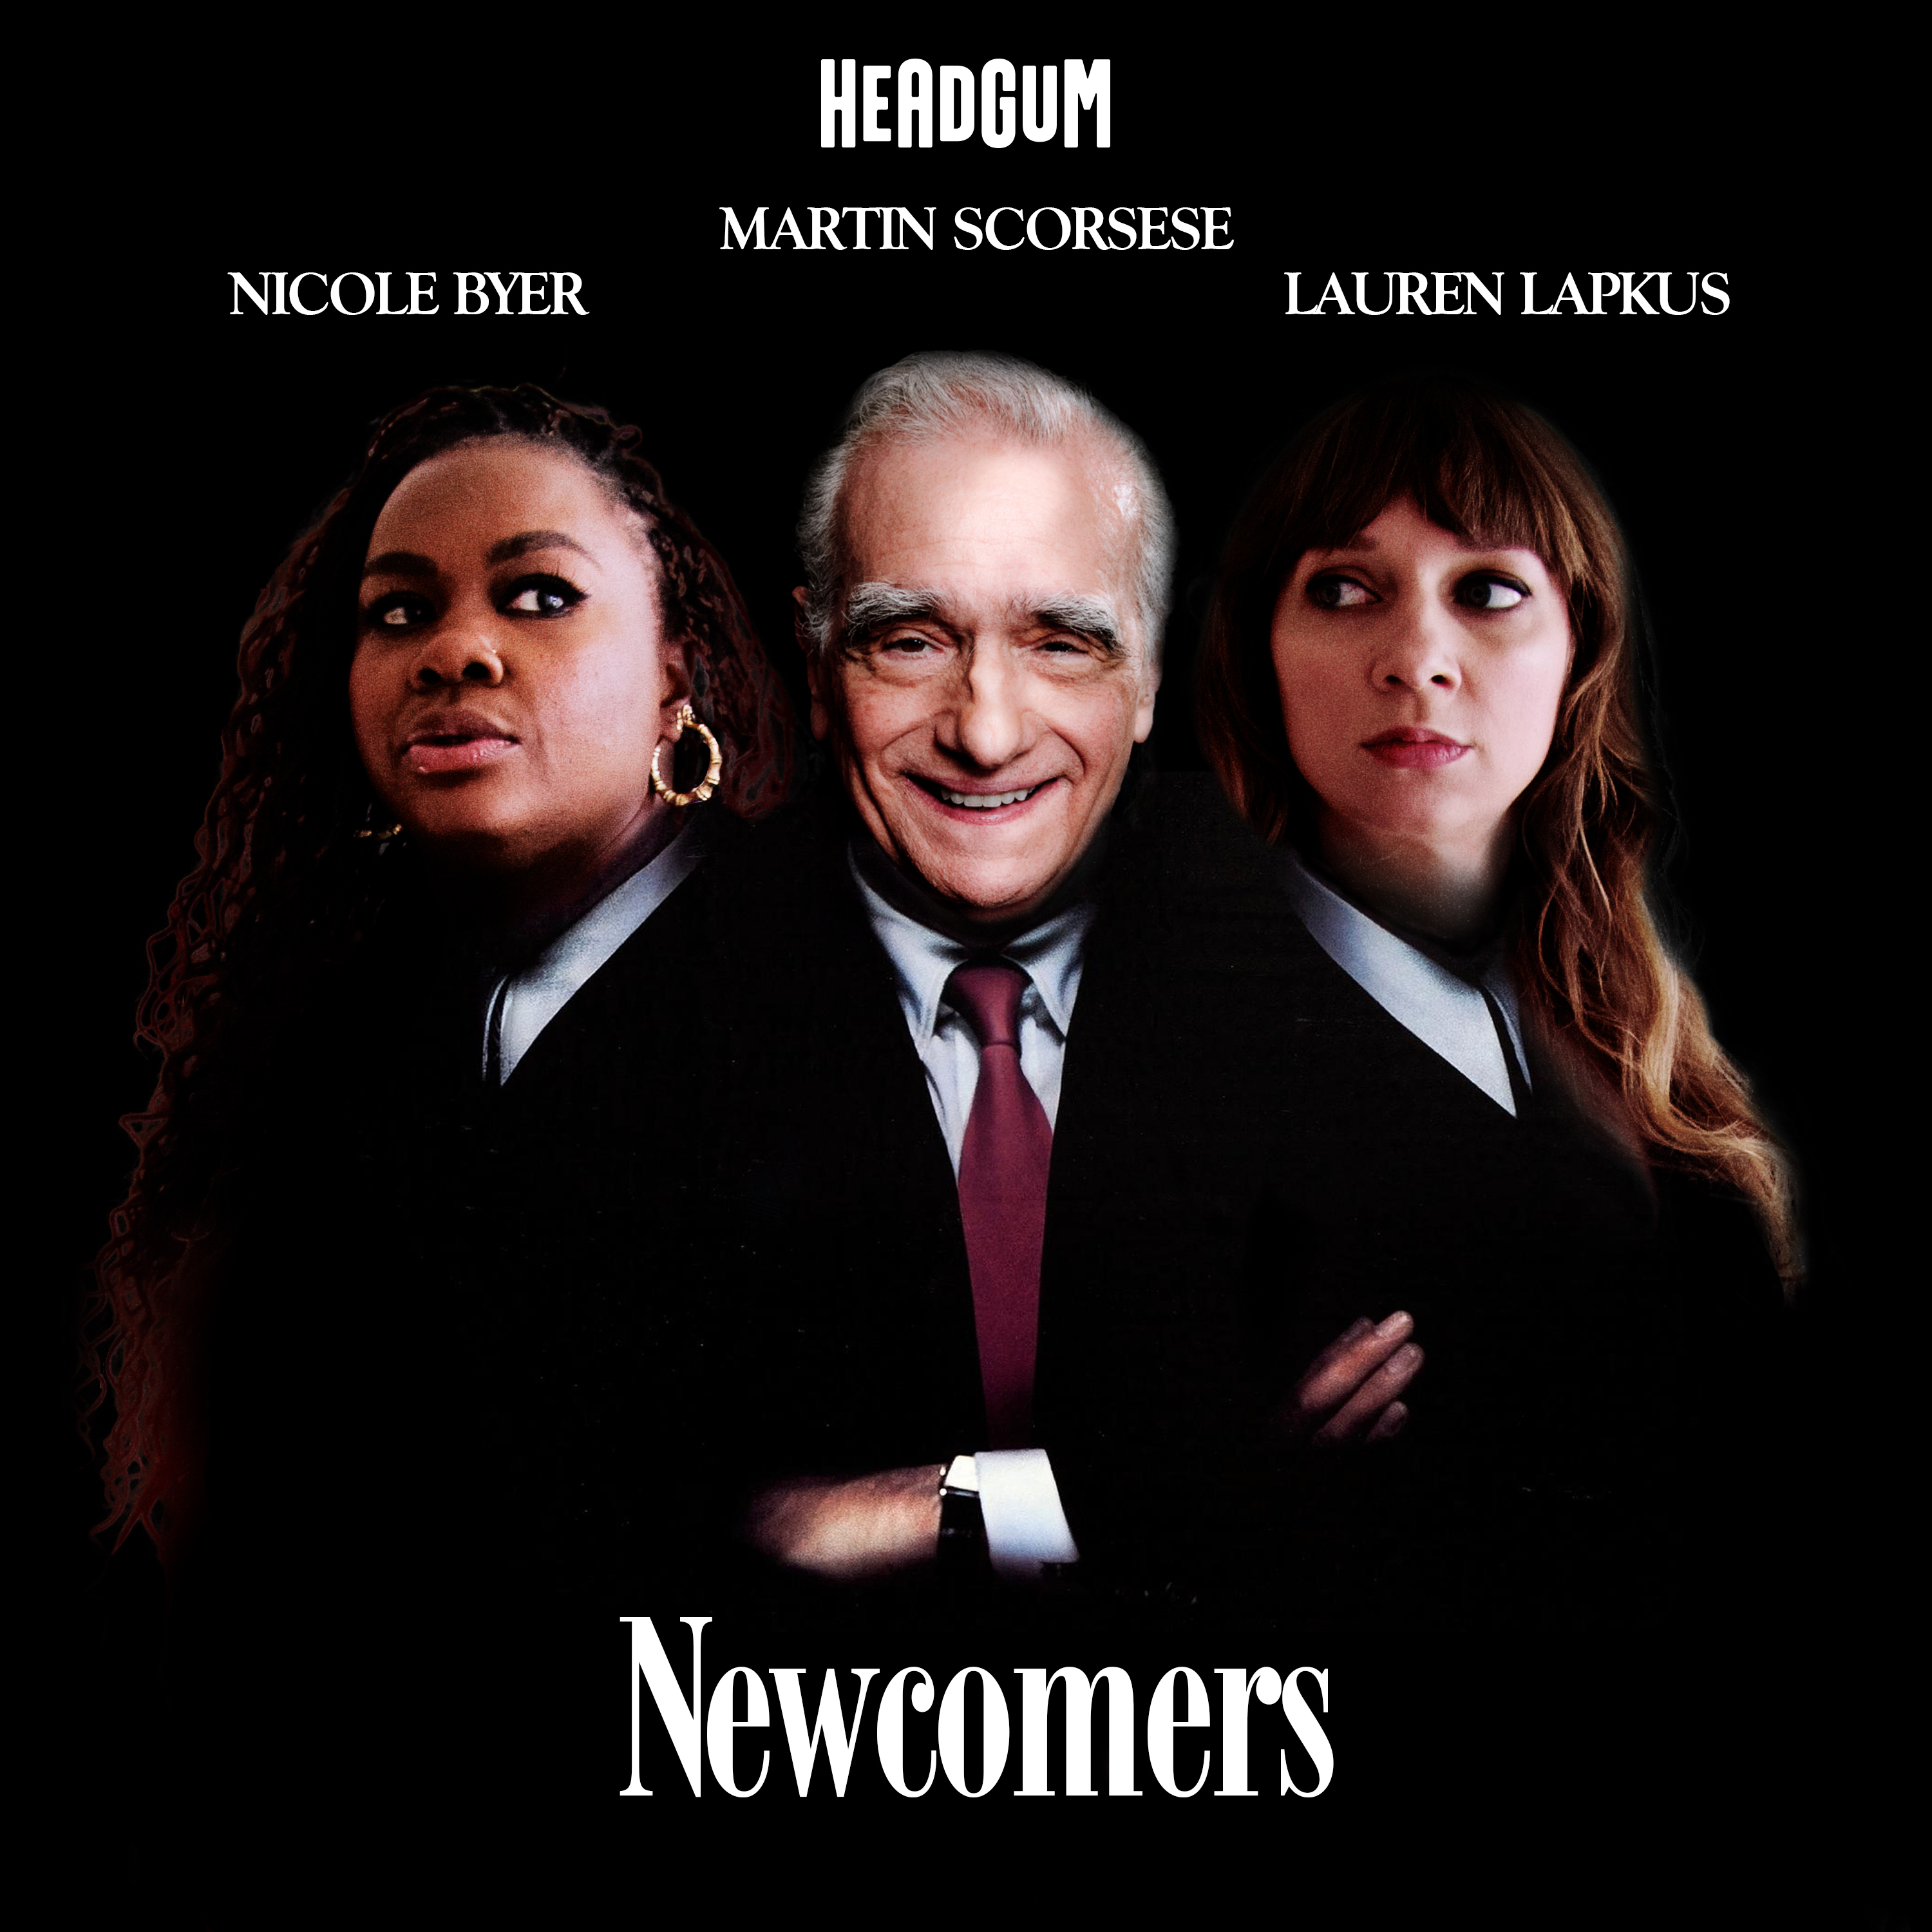 Newcomers: Scorsese, with Nicole Byer and Lauren Lapkus